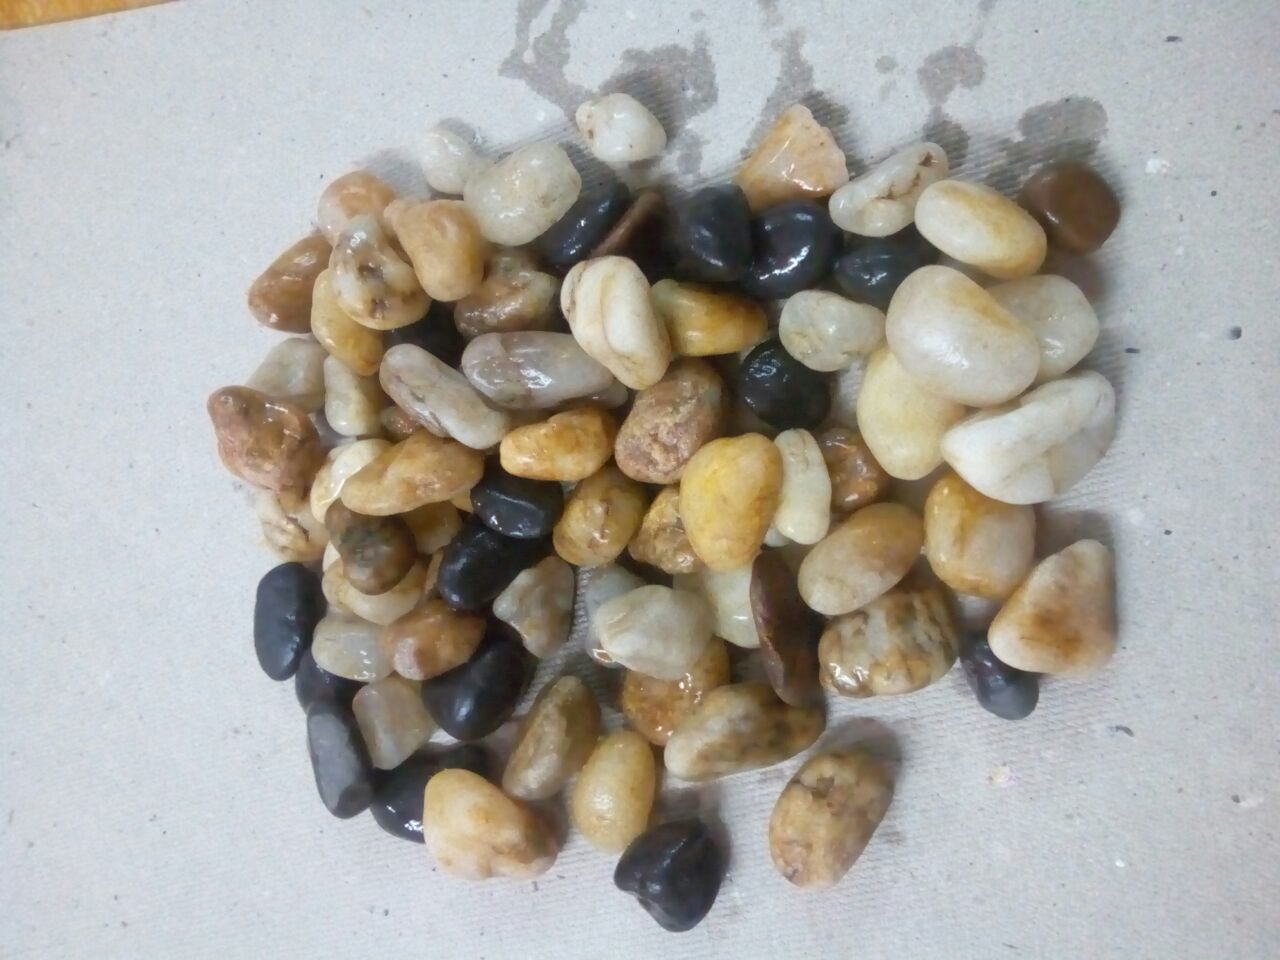 Pebble wash River Round Mix Gravel stone and landscaping garden pathway stonw pebbles